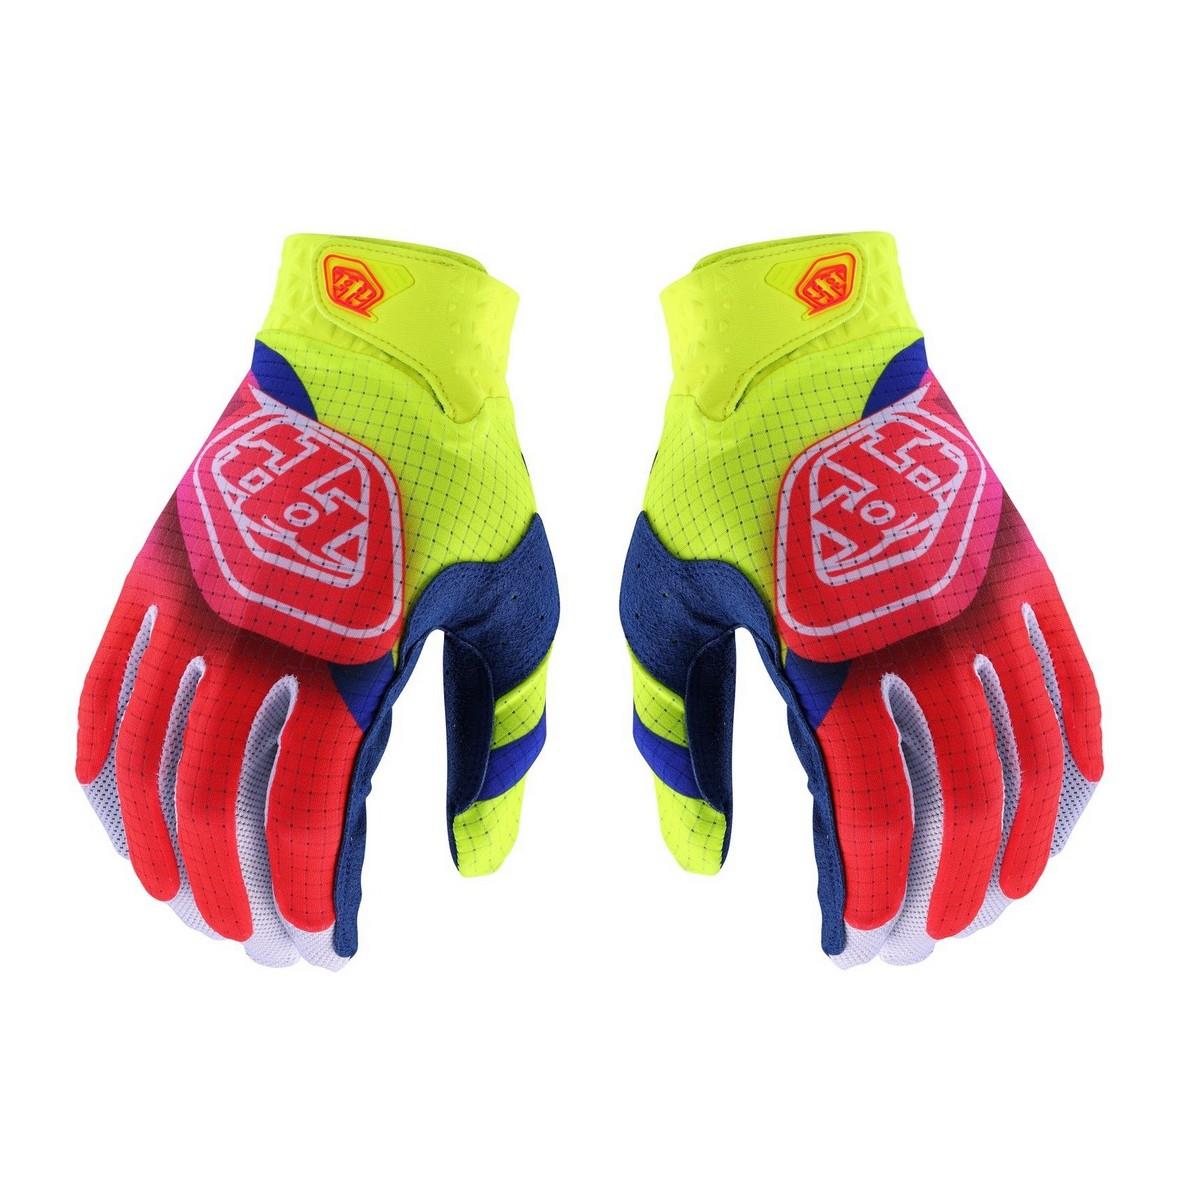 MTB Gloves Air Glove Radian Multicolored Size S